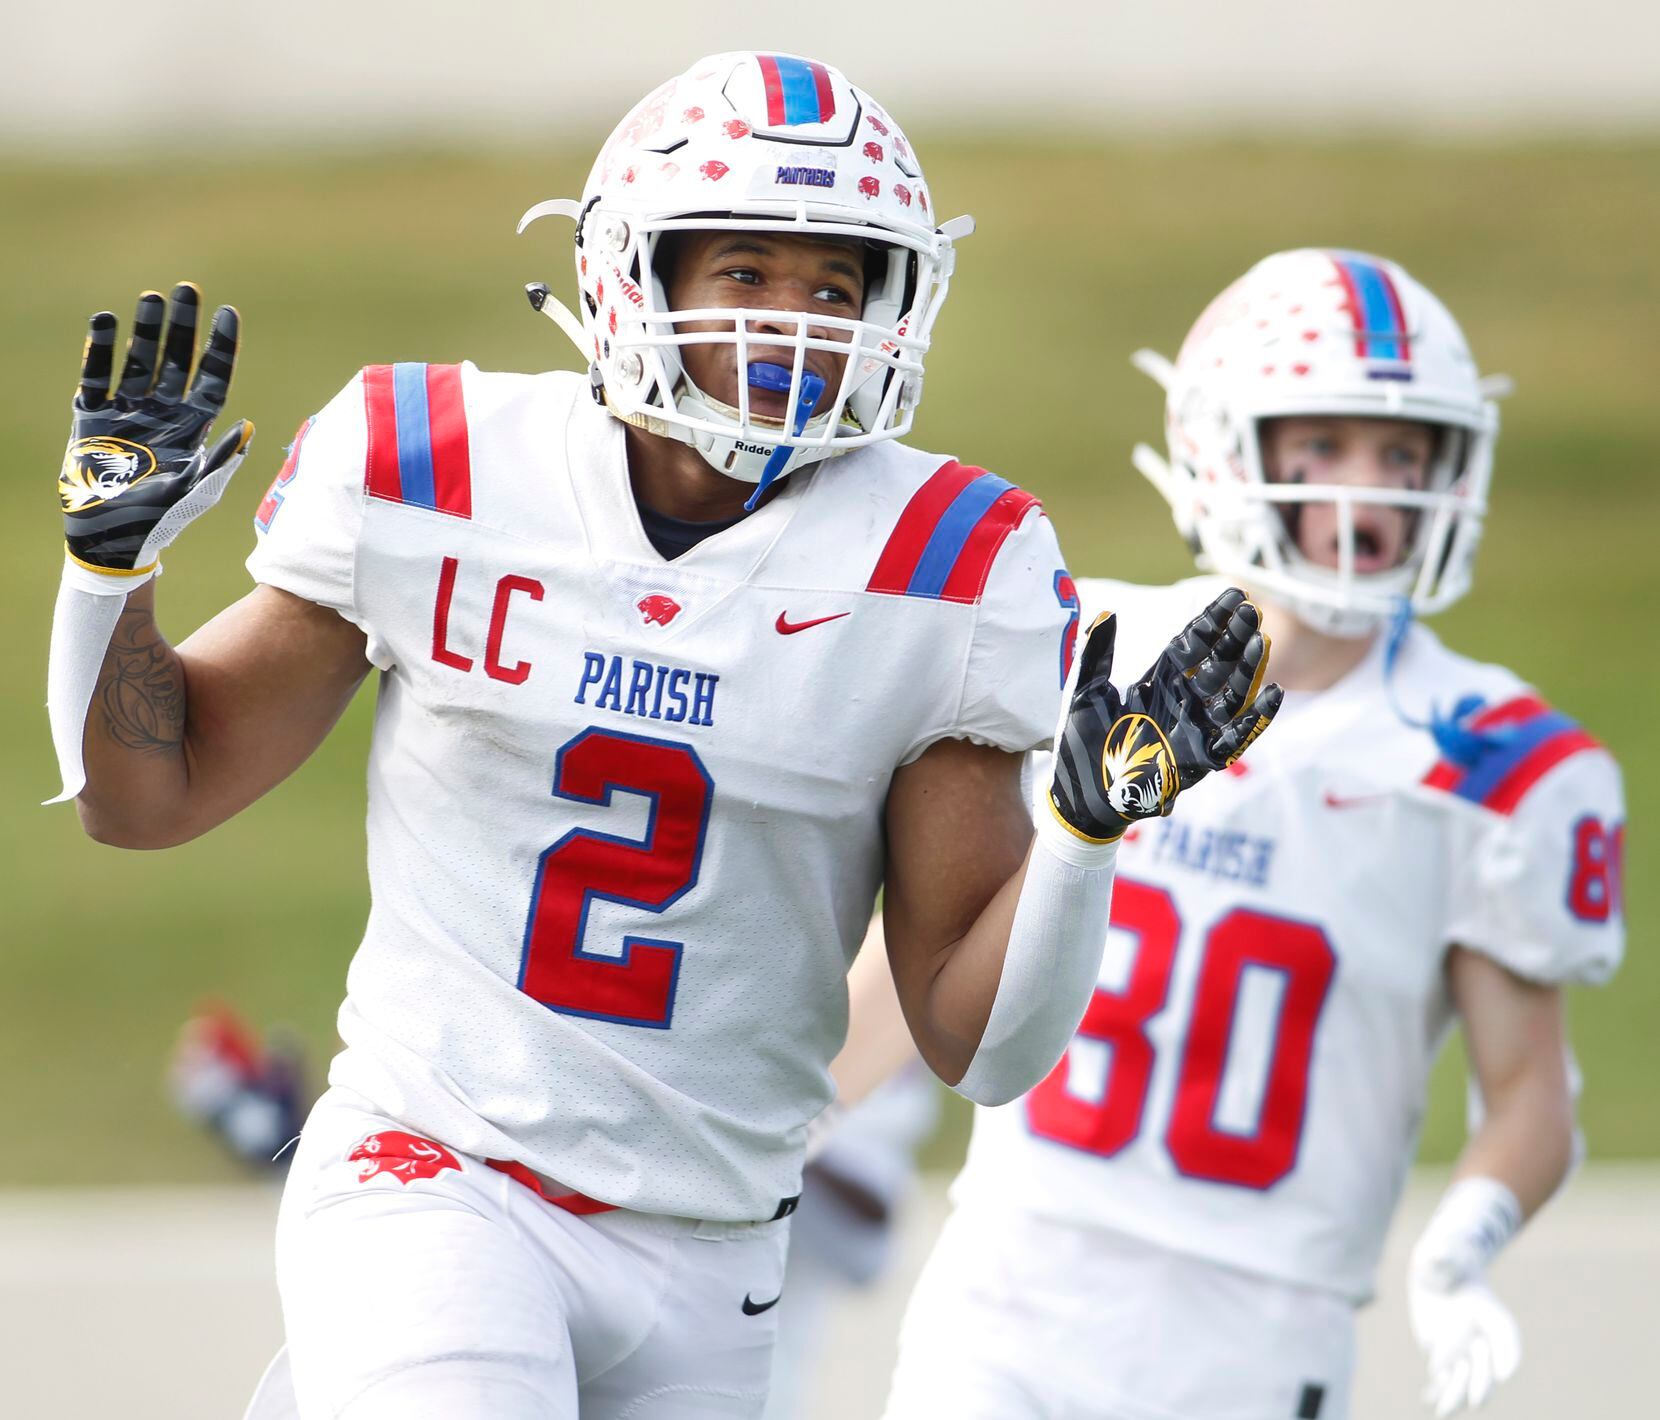 Parish Episcopal running back Andrew Paul (2) celebrates after scoring one of his three first half rushing touchdowns against Midland Christian. The two teams played their TAPPS Division 1 state championship football game at Waco ISD Stadium in Waco on December 4, 2021. (Steve Hamm/ Special Contributor)